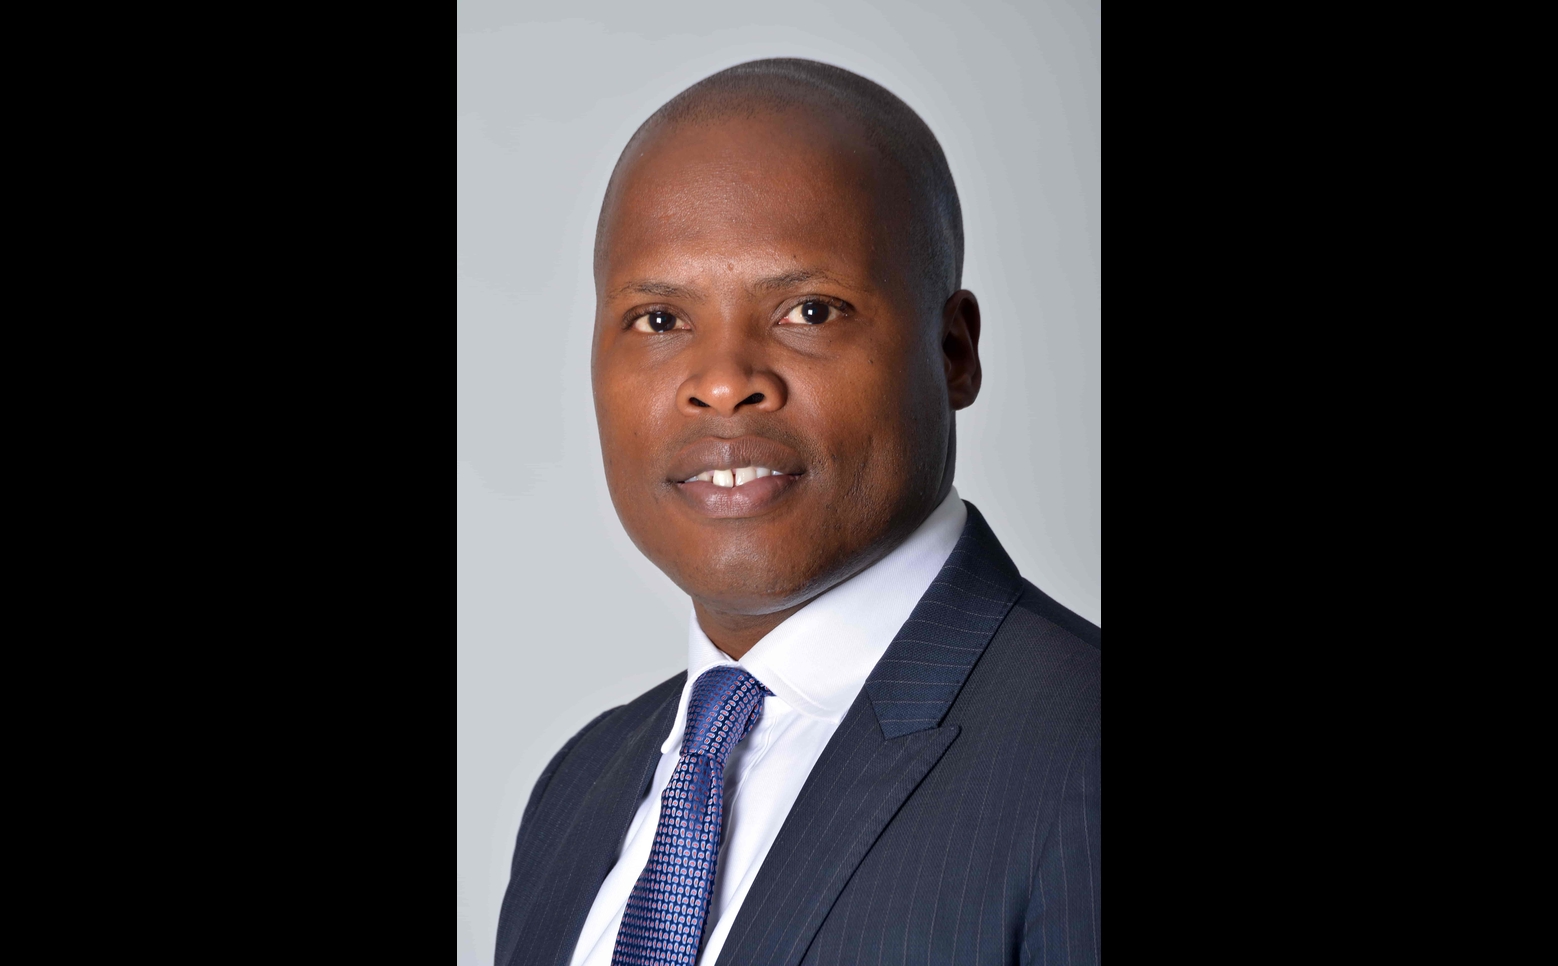 Xolani Mbambo, appointed Financial Director Grindrod Limited, with effect from 1 September 2018